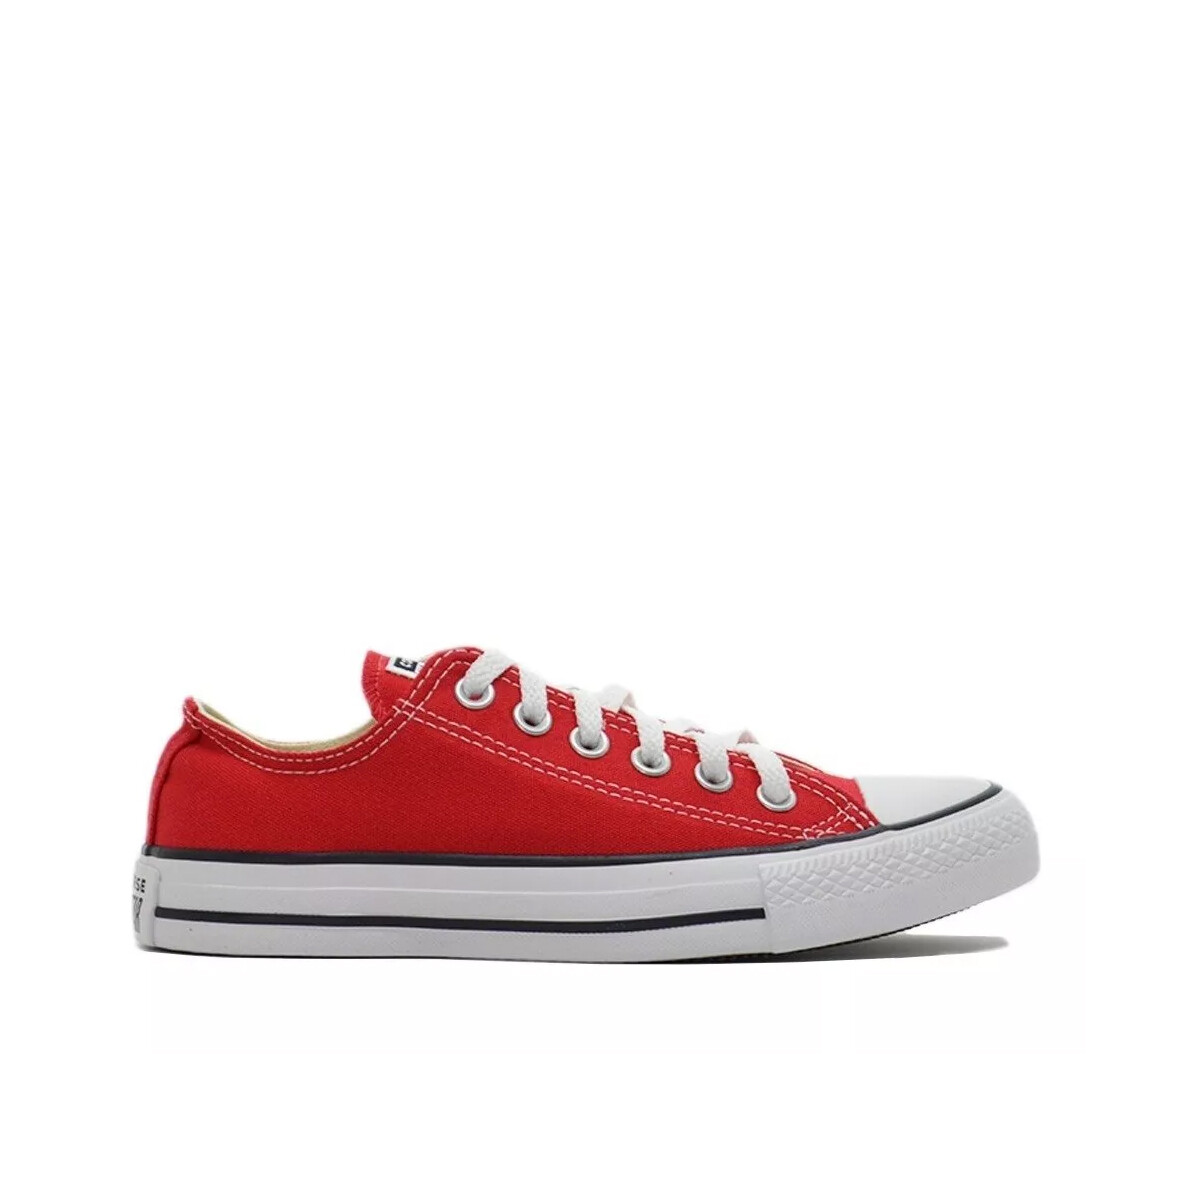 Championes Converse All Star 135984B - RED/NAVY 